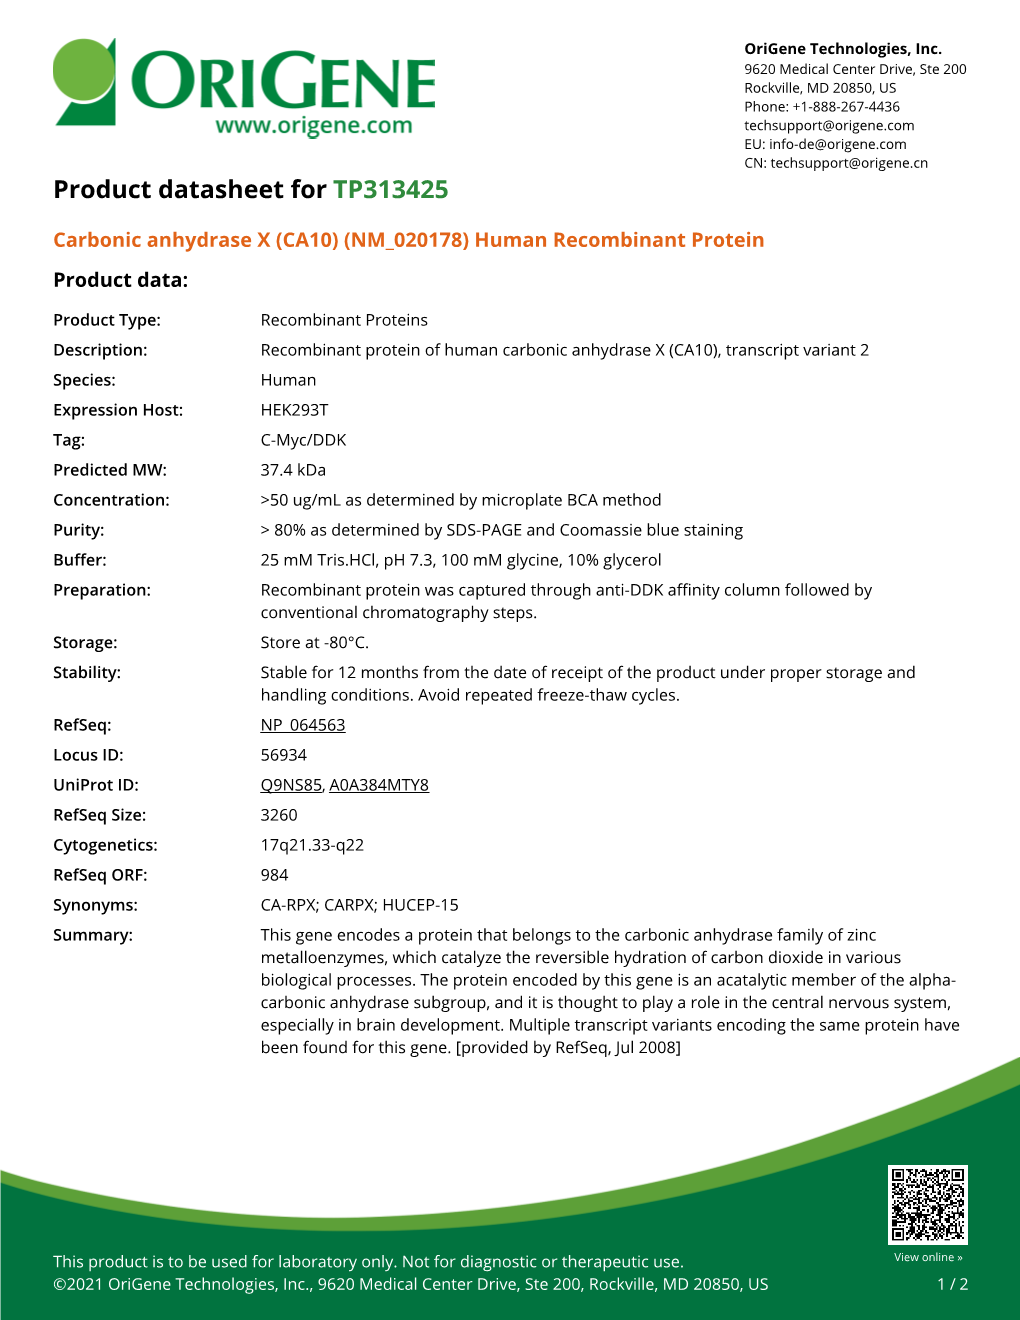 Carbonic Anhydrase X (CA10) (NM 020178) Human Recombinant Protein Product Data